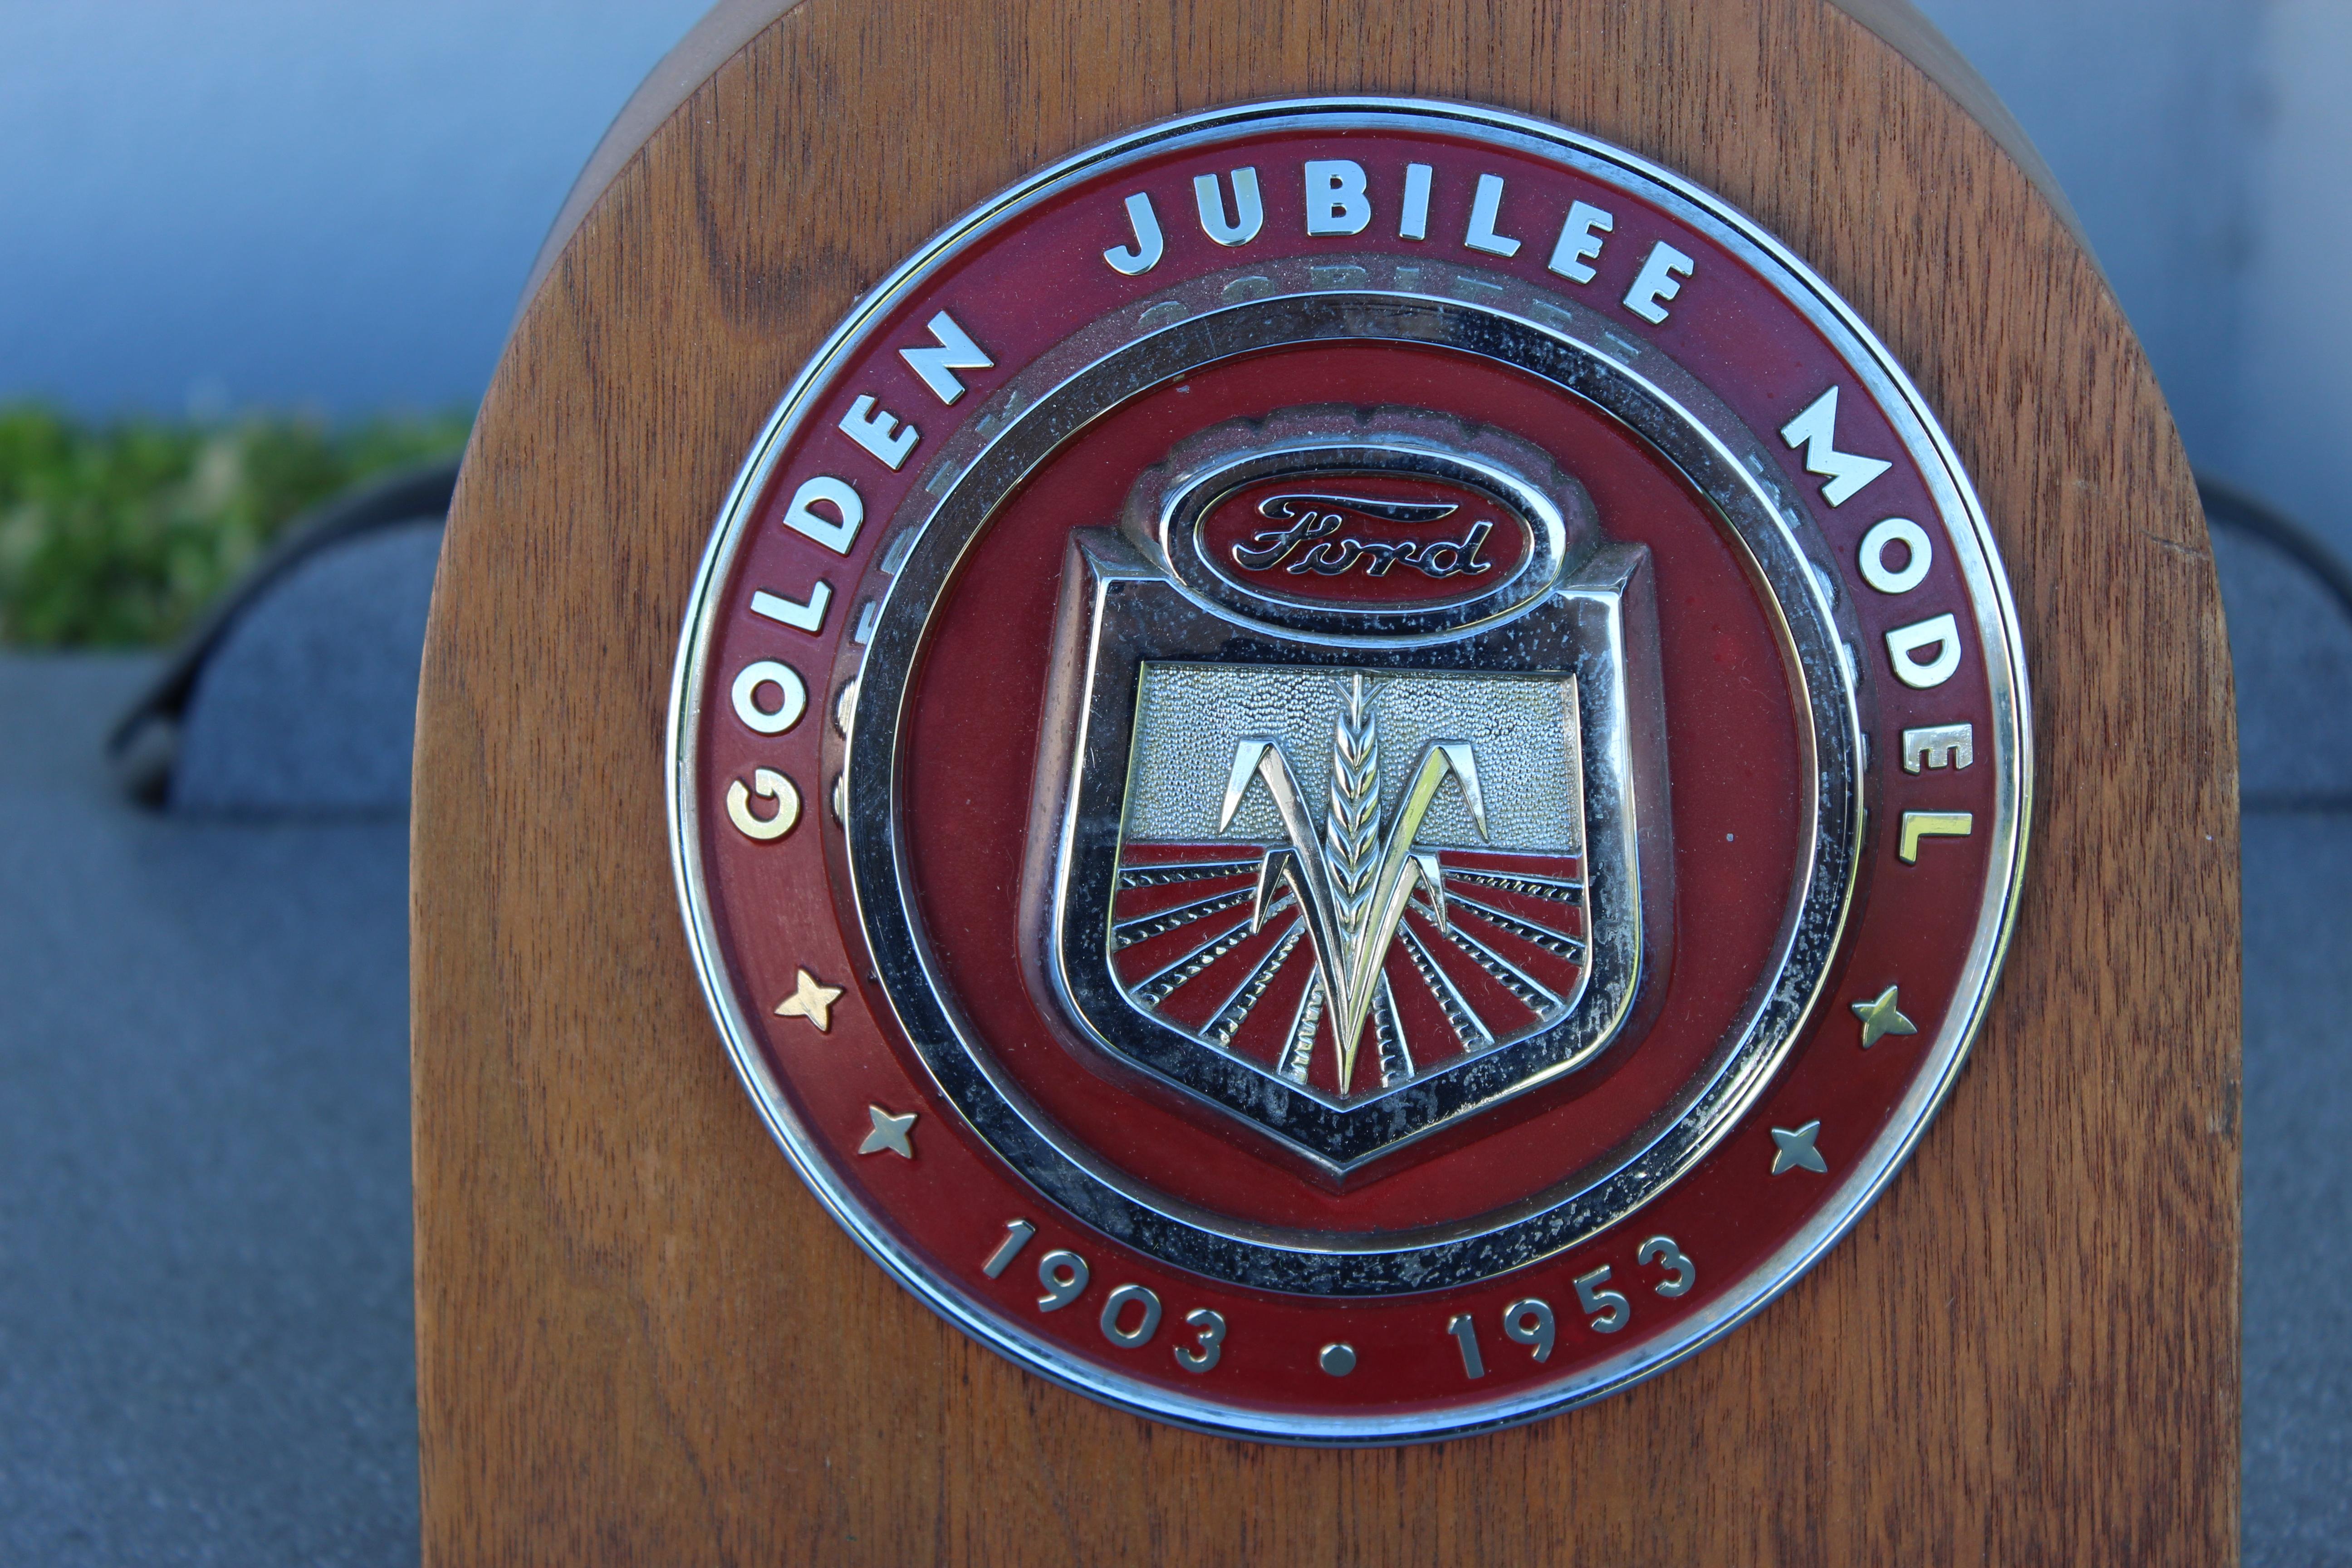 Ford Golden Jubilee Tractor Hood Emblem mounted onto wood. These emblems were found on the front / nose of the tractor.